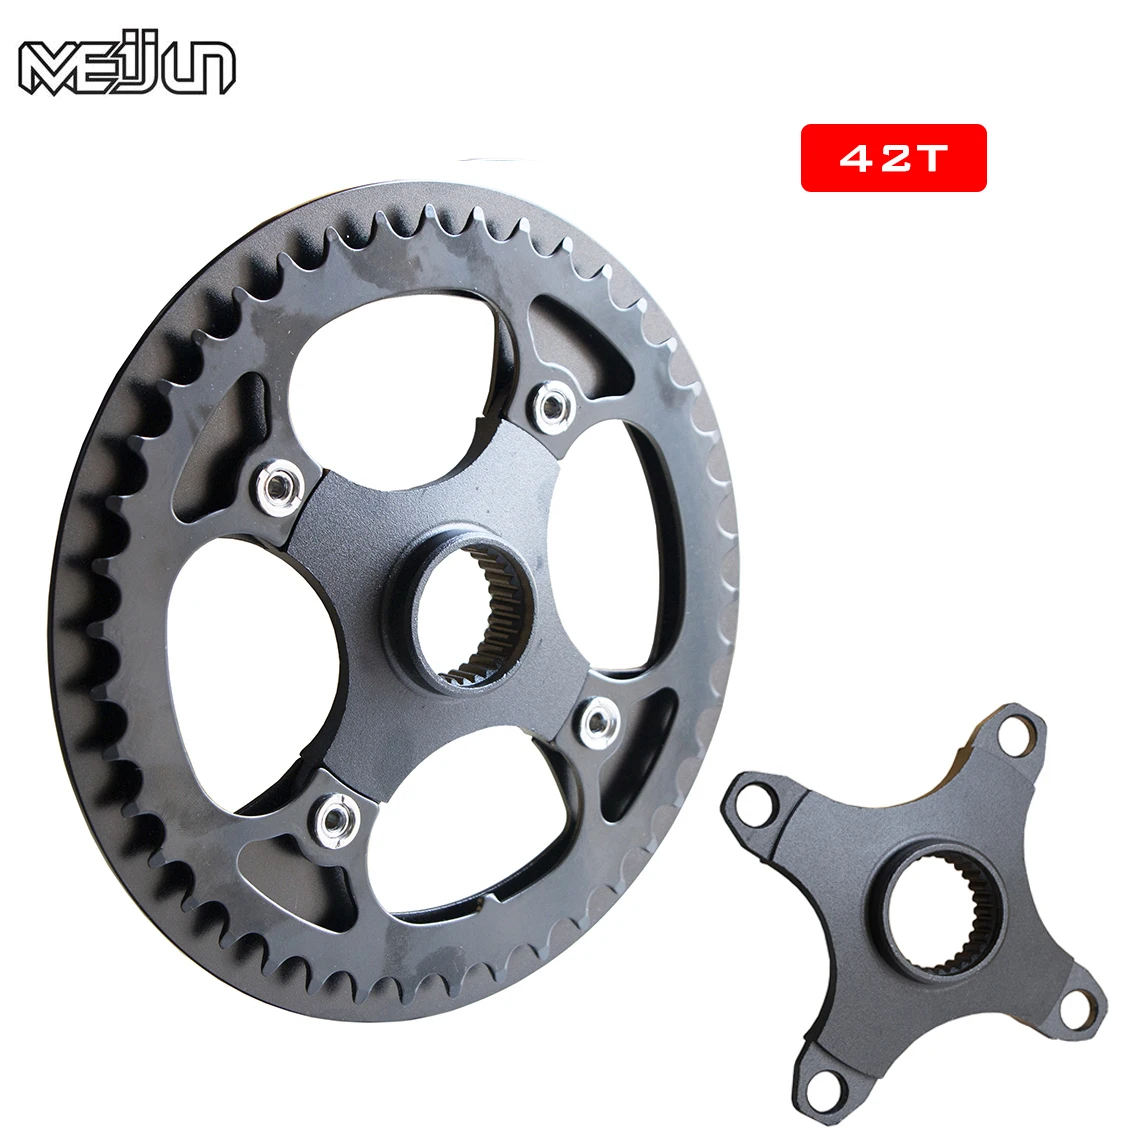 

Bafang M400 M300 M200 M215 M410 M315 Mid Motor Chain Wheel Chainring 42T Electric Bicycle Conversions 8FUN Parts